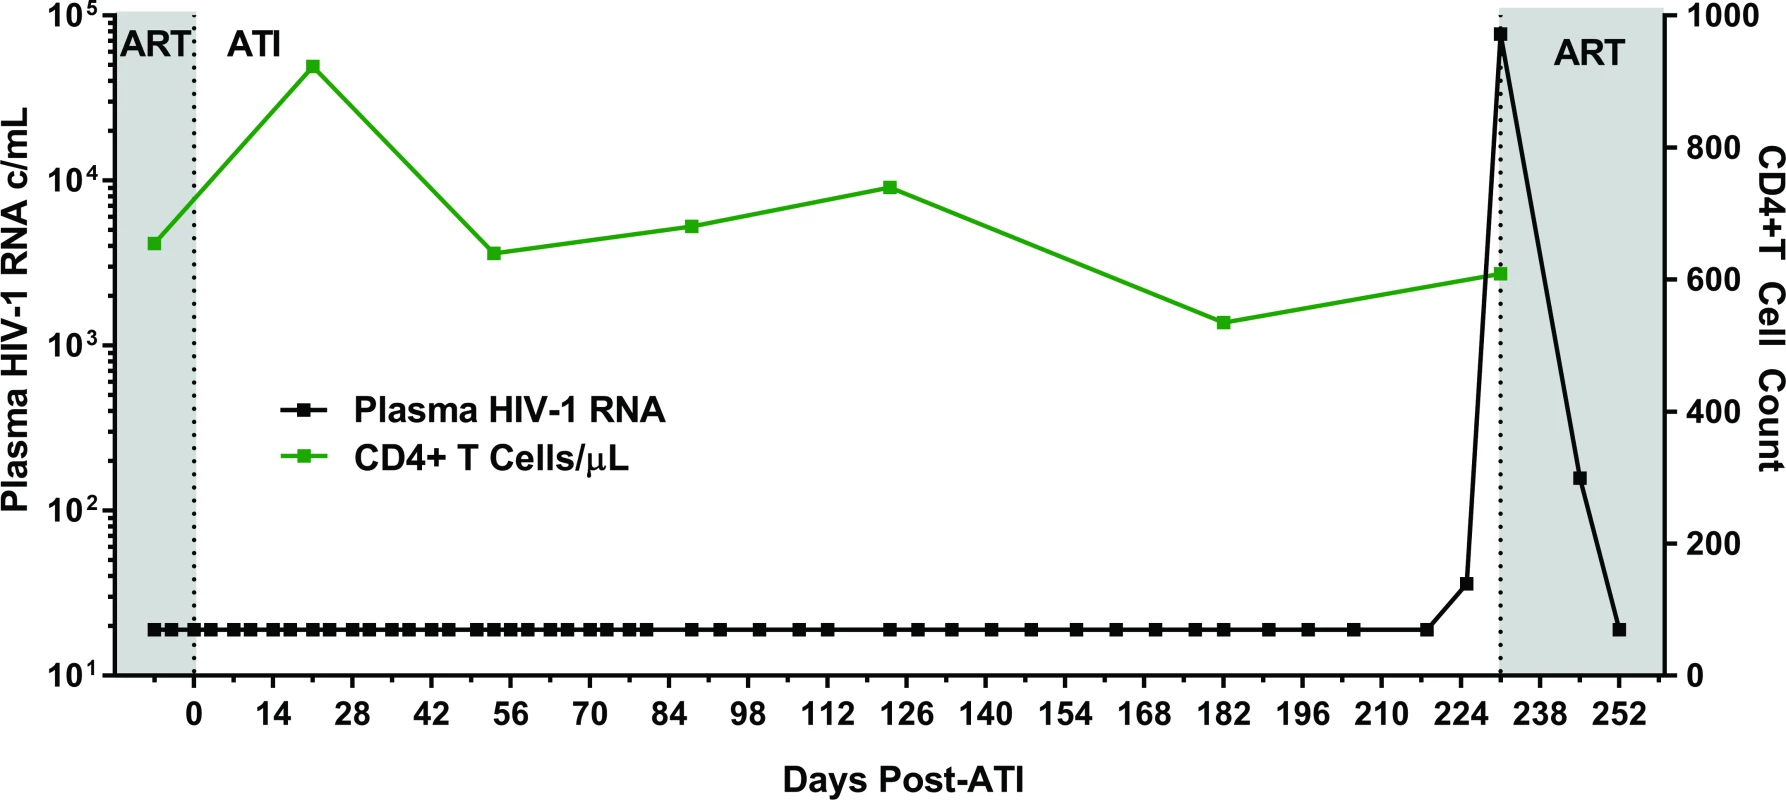 Summary timeline of plasma viral load and CD4+ T cell counts following analytical ART treatment interruption in Participant A.